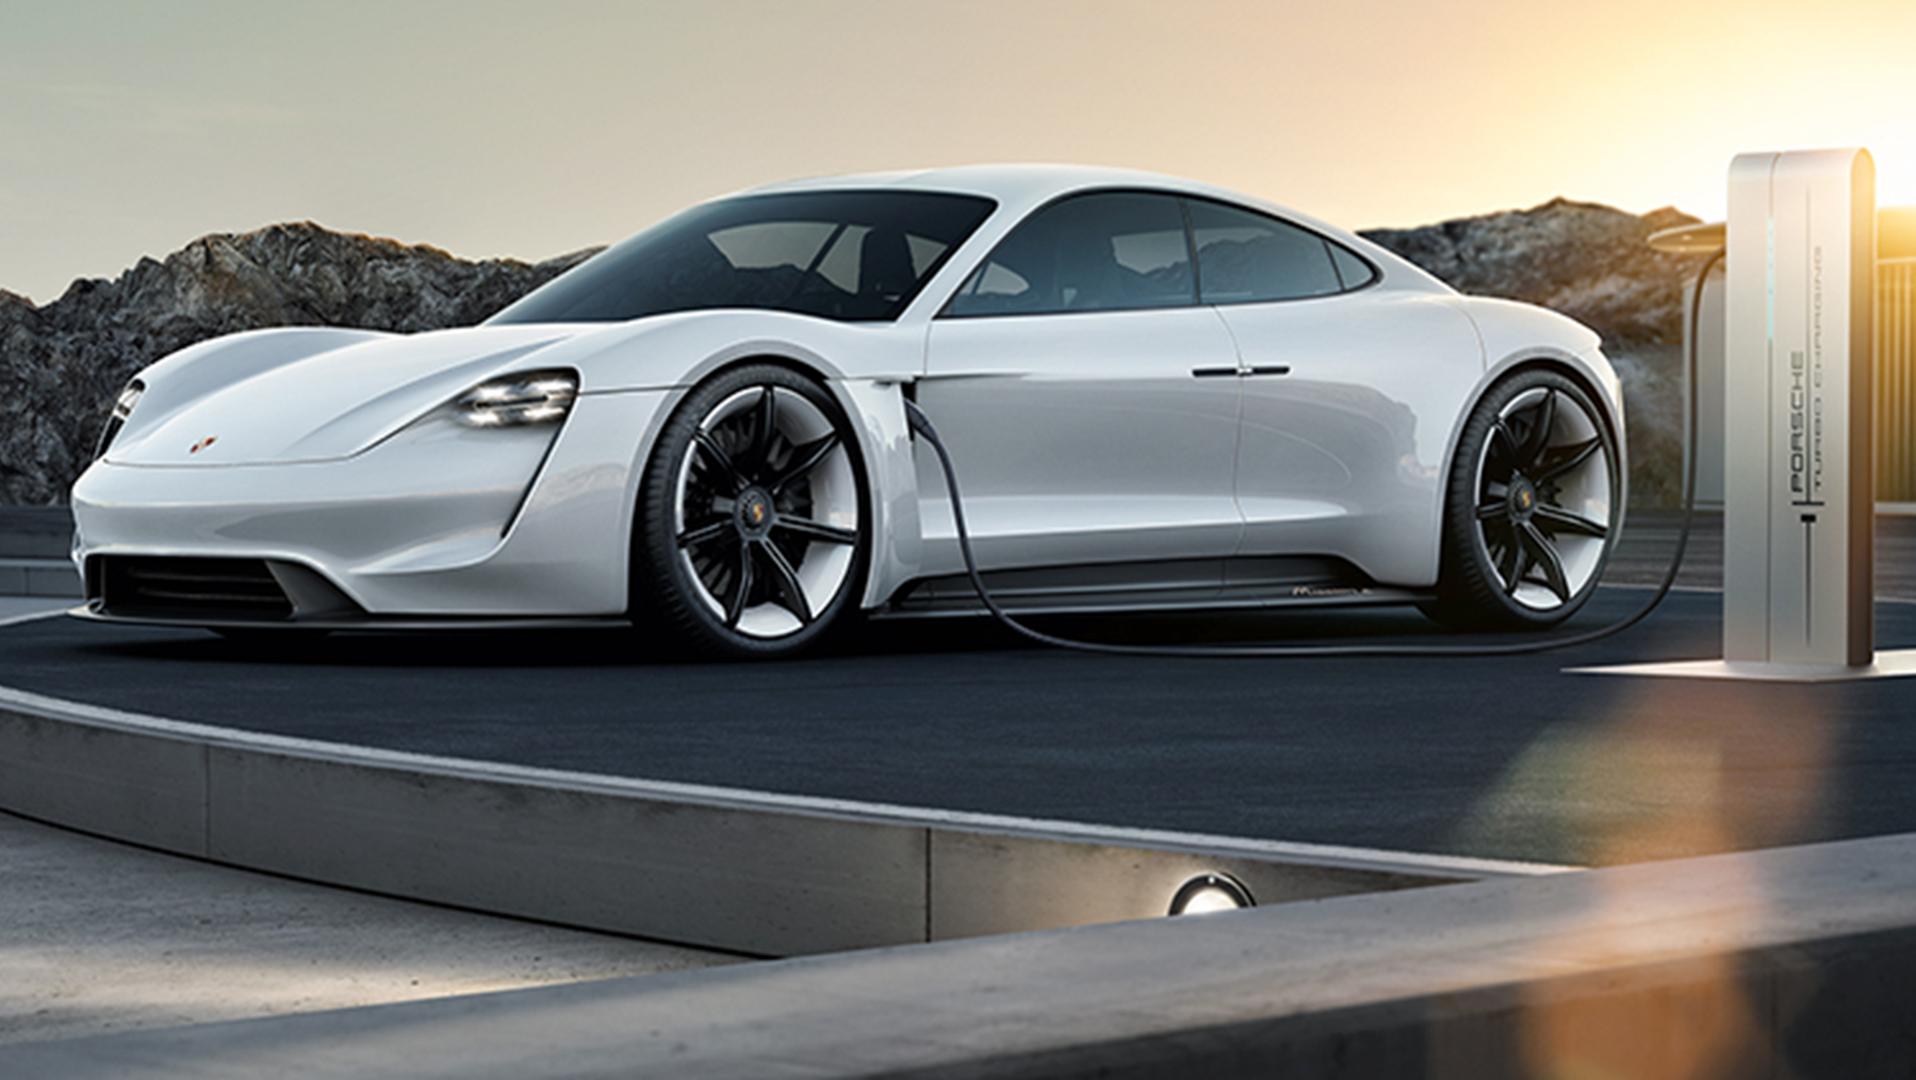 Porsche expands plans for dealership-based charging system ahead of Taycan’s release